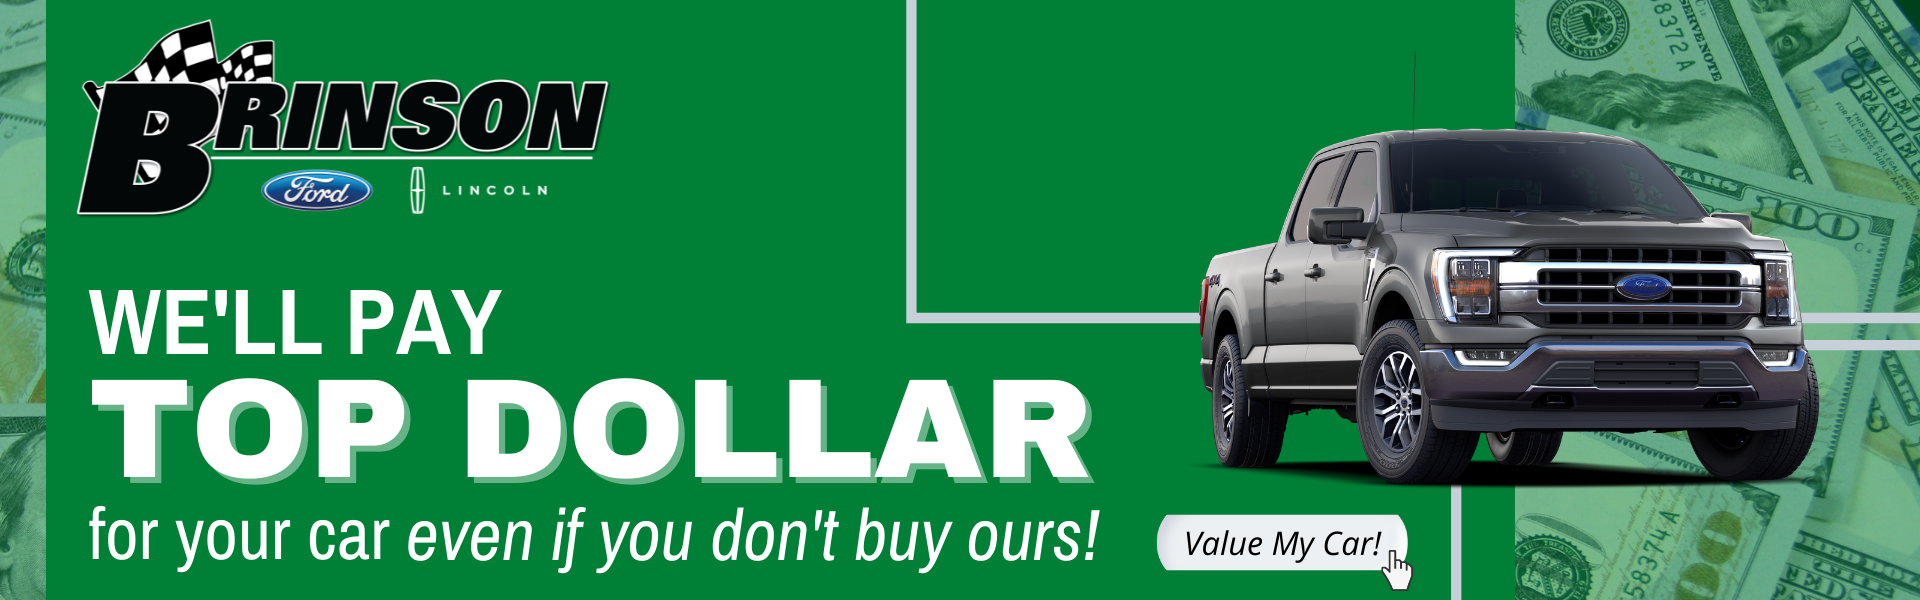 Sell Us Your Car Today!